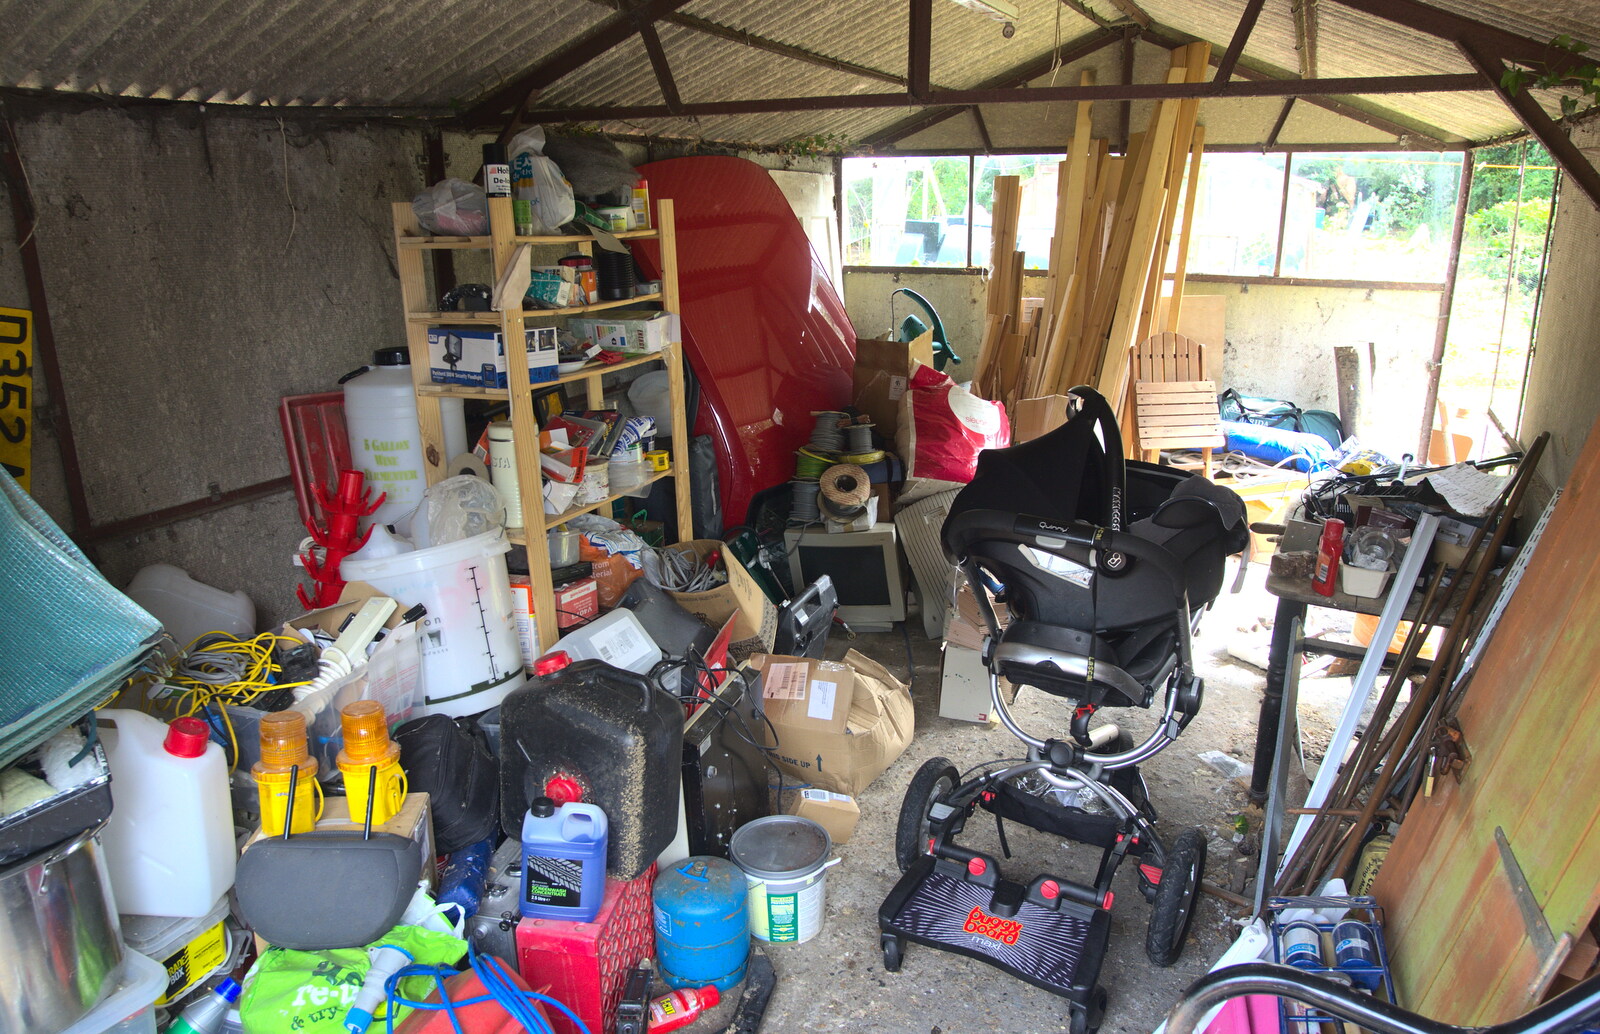 A junk-filled garage from The BSCC at Pulham Crown, and Grandad with a Grinder, Brome, Suffolk - 11th July 2013